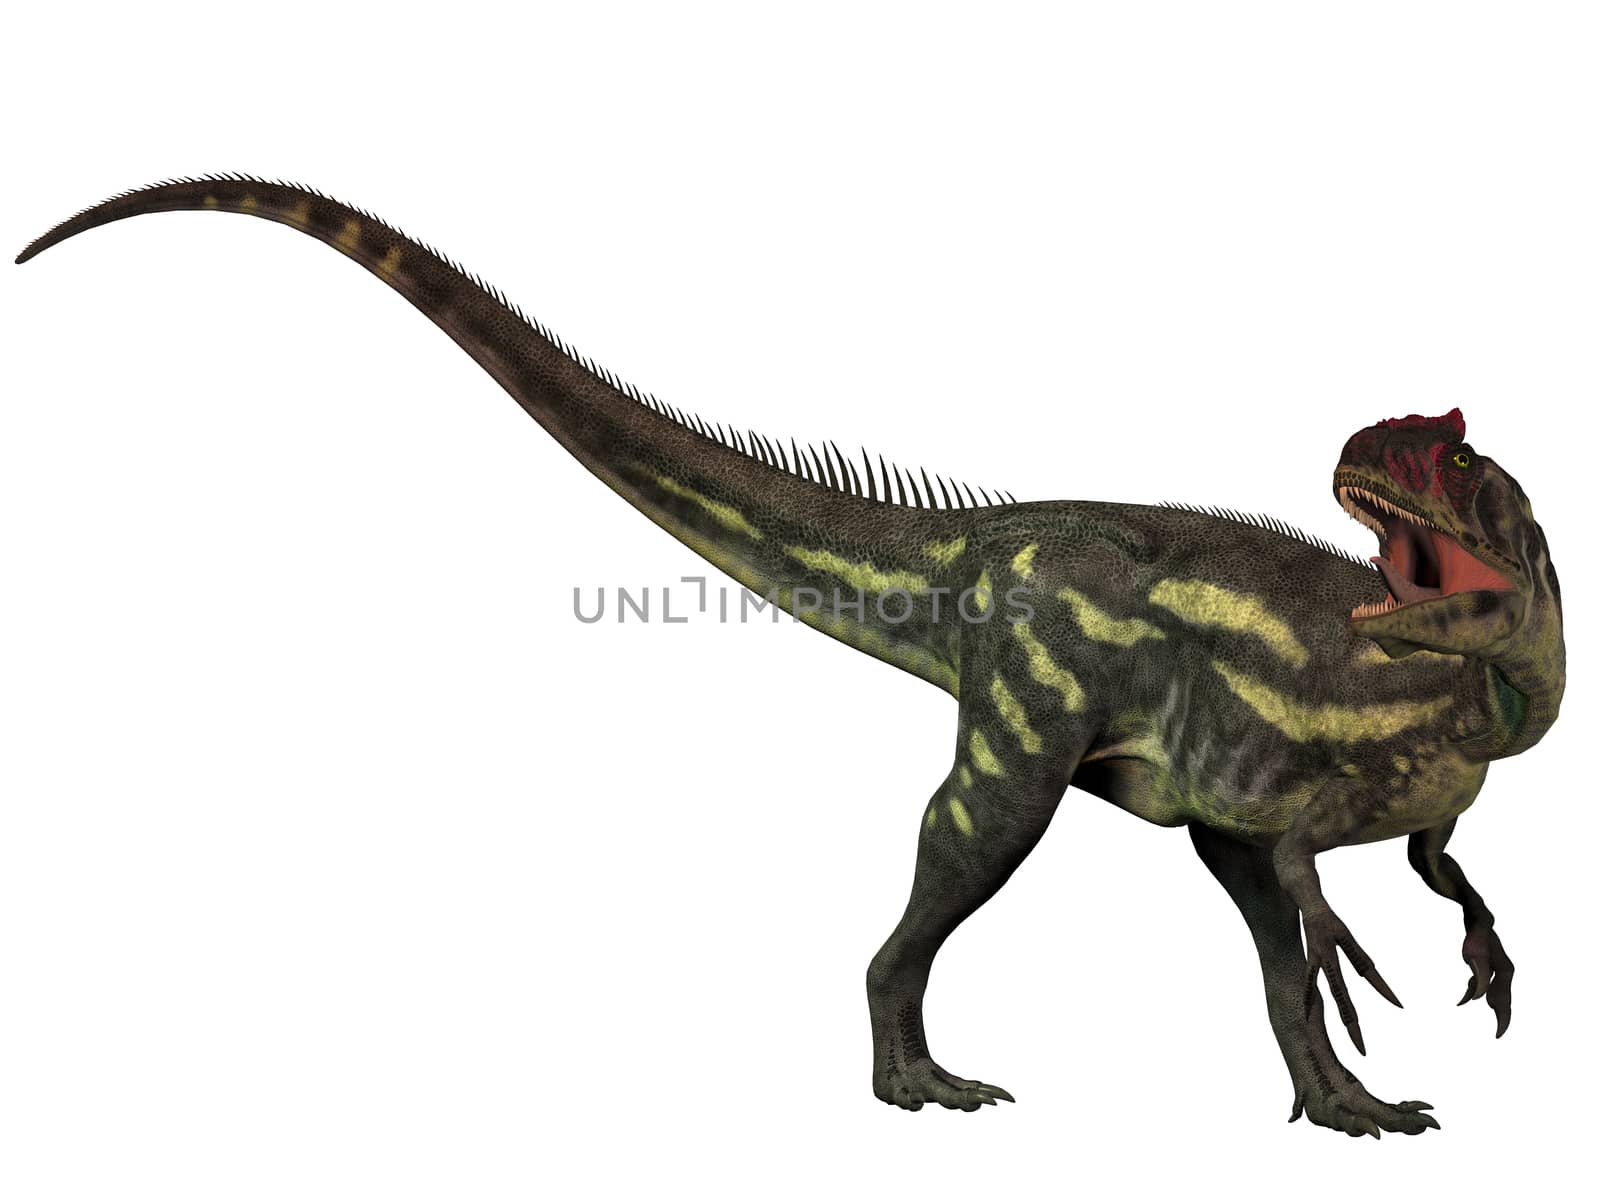 Allosaurus was a large theropod predatory dinosaur which lived in the late Jurassic period. 